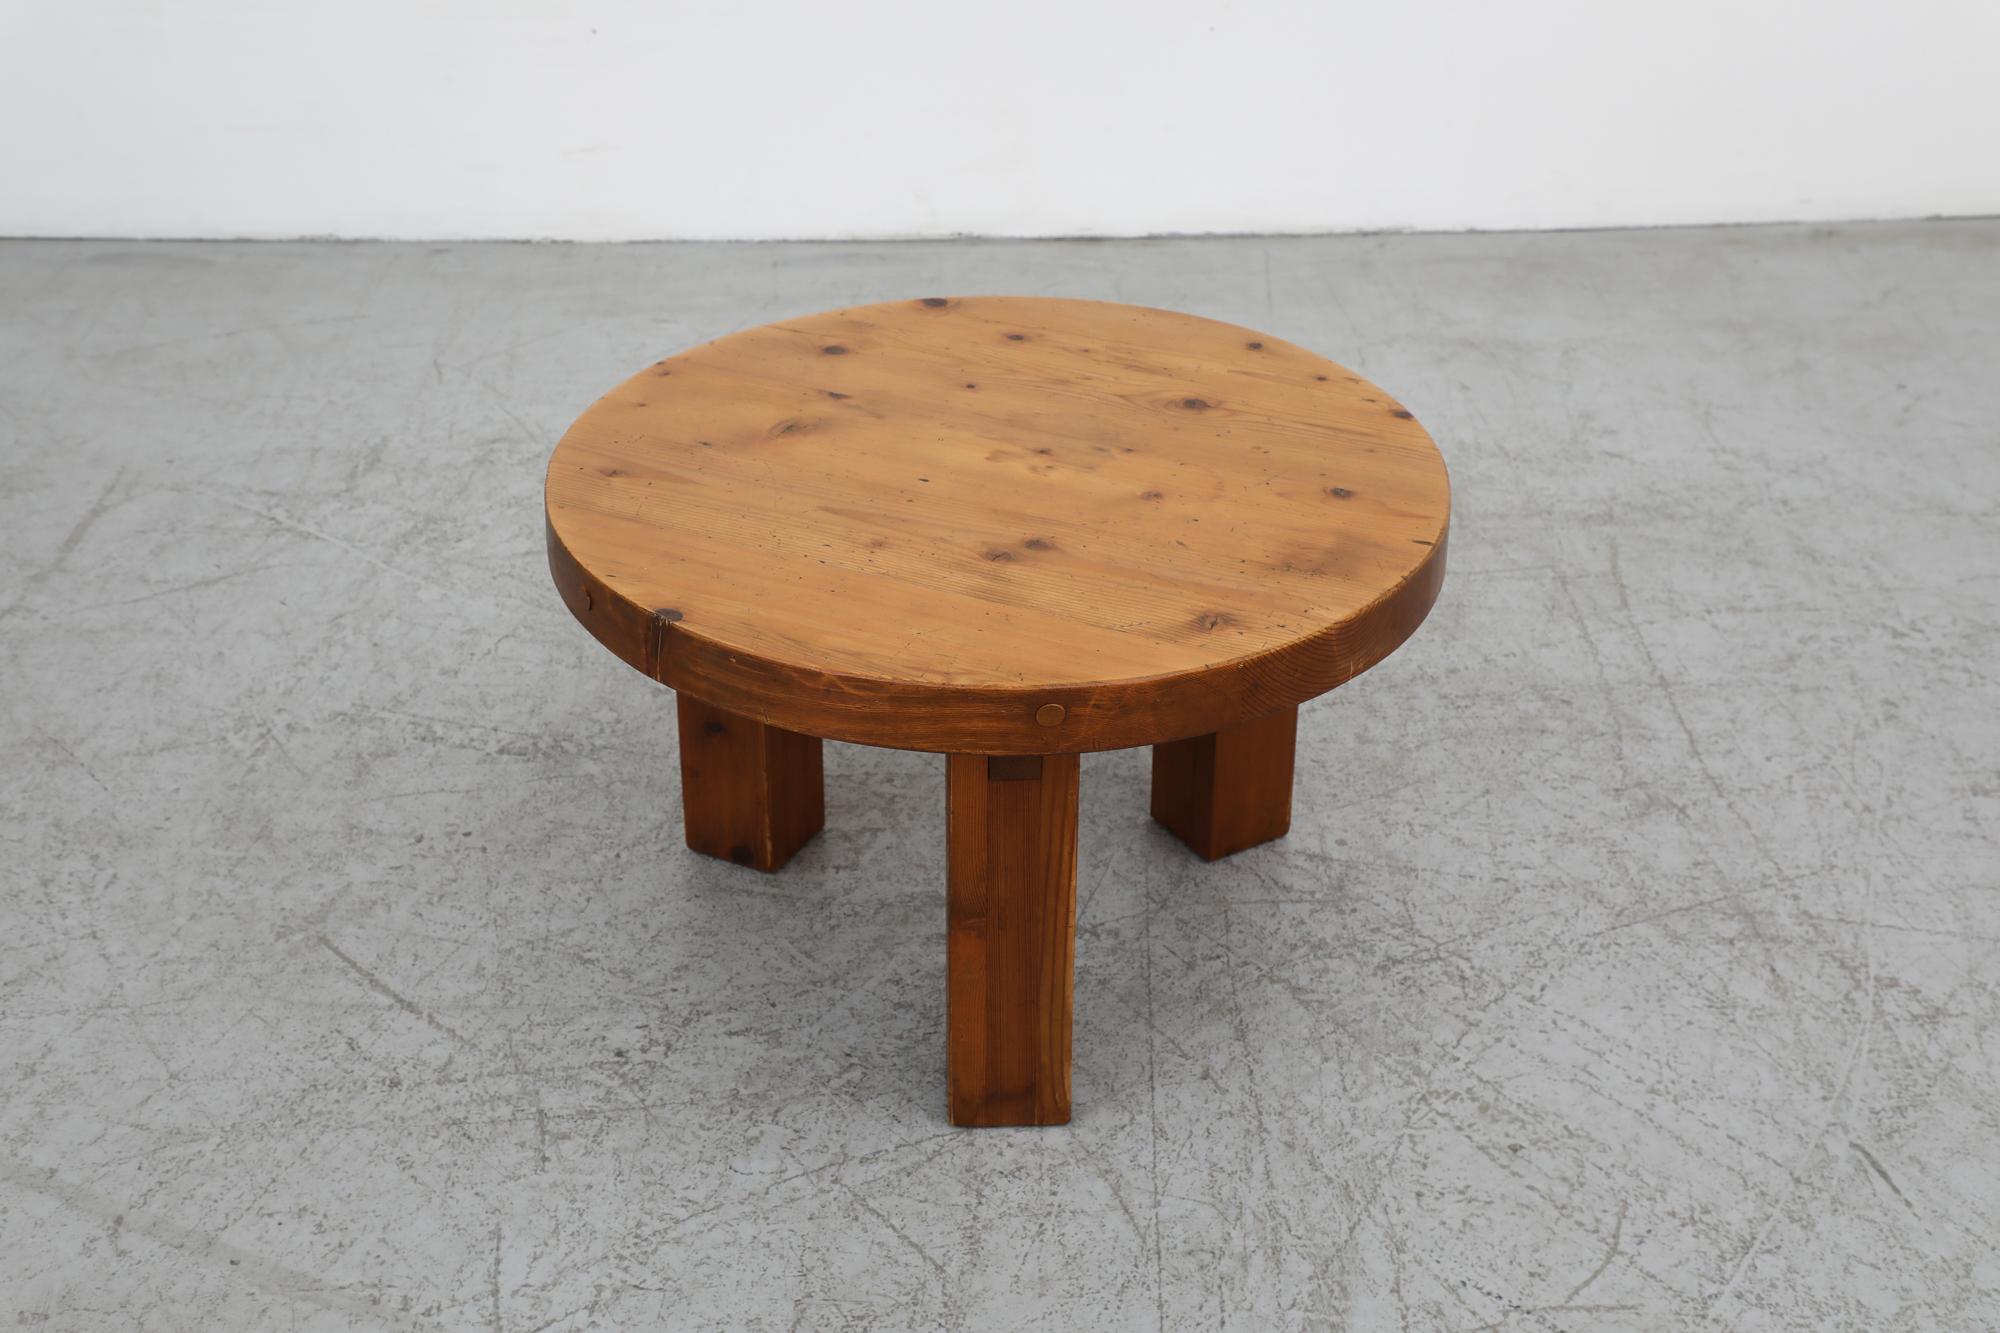 Dutch Pierre Chapo Inspired Heavy Pine Brutalist Side Table w/ Round Top & Square Legs For Sale